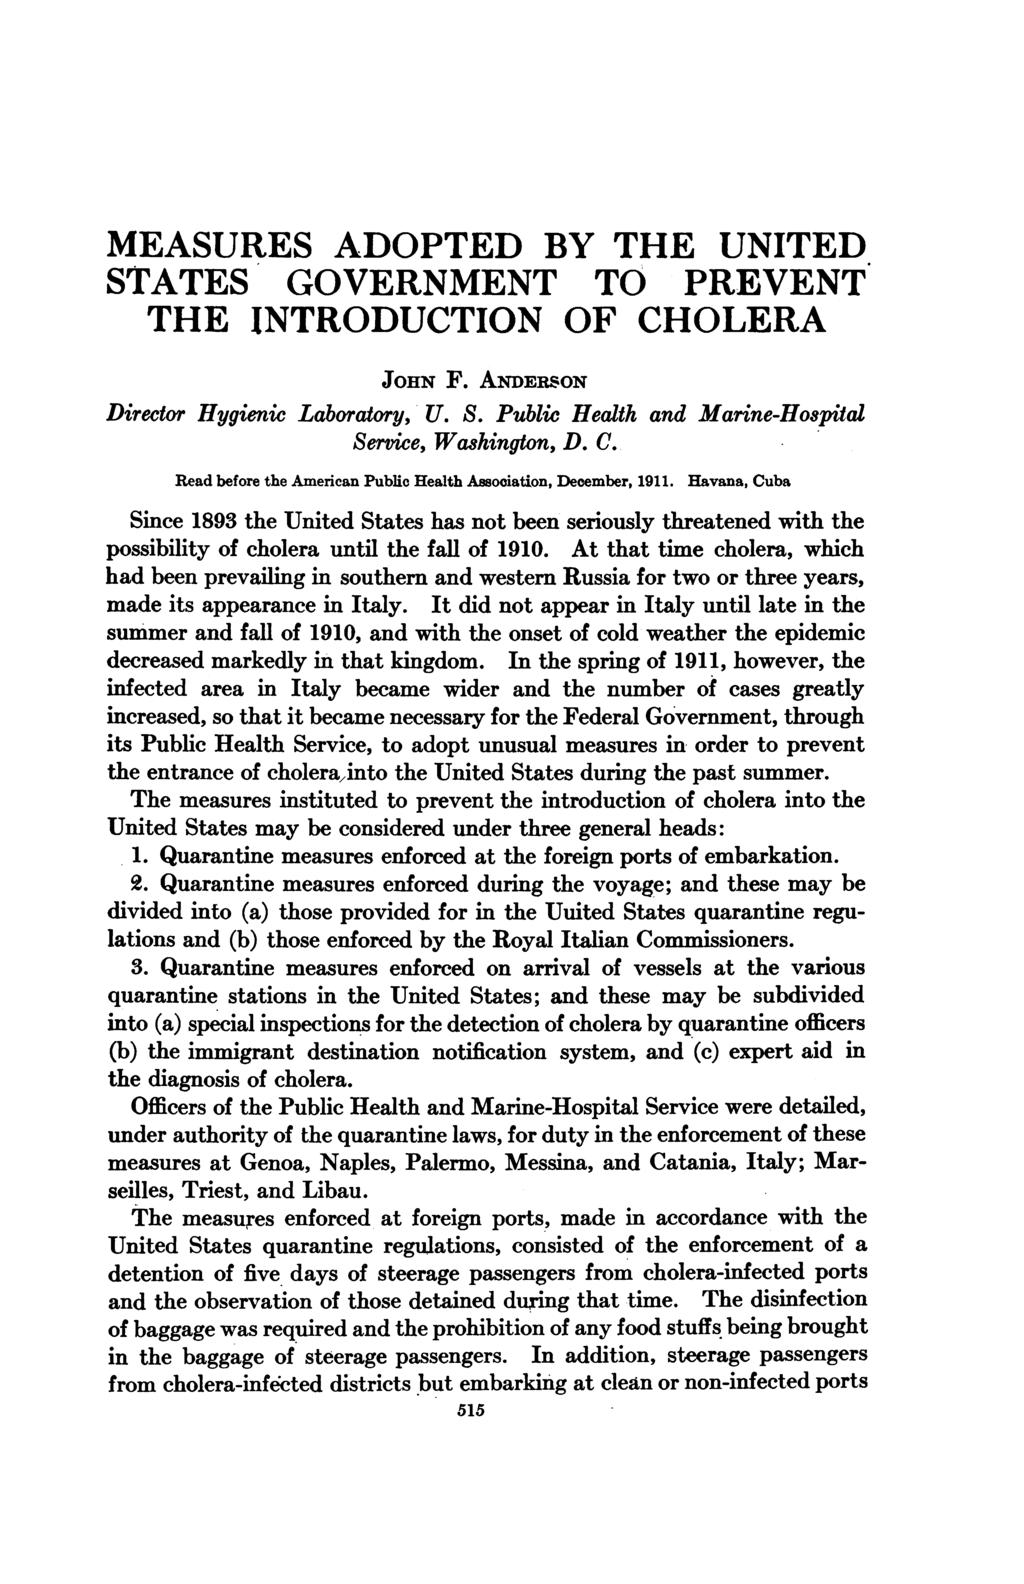 MEASURES ADOPTED BY THE UNITED STATES GOVERNMENT TO PREVENT THE INTRODUCTION OF CHOLERA JOHN F. ANDERsON Director Hygienic Laboratory, U. S. Public Health and Marine-Hospital Service, Washington, D.